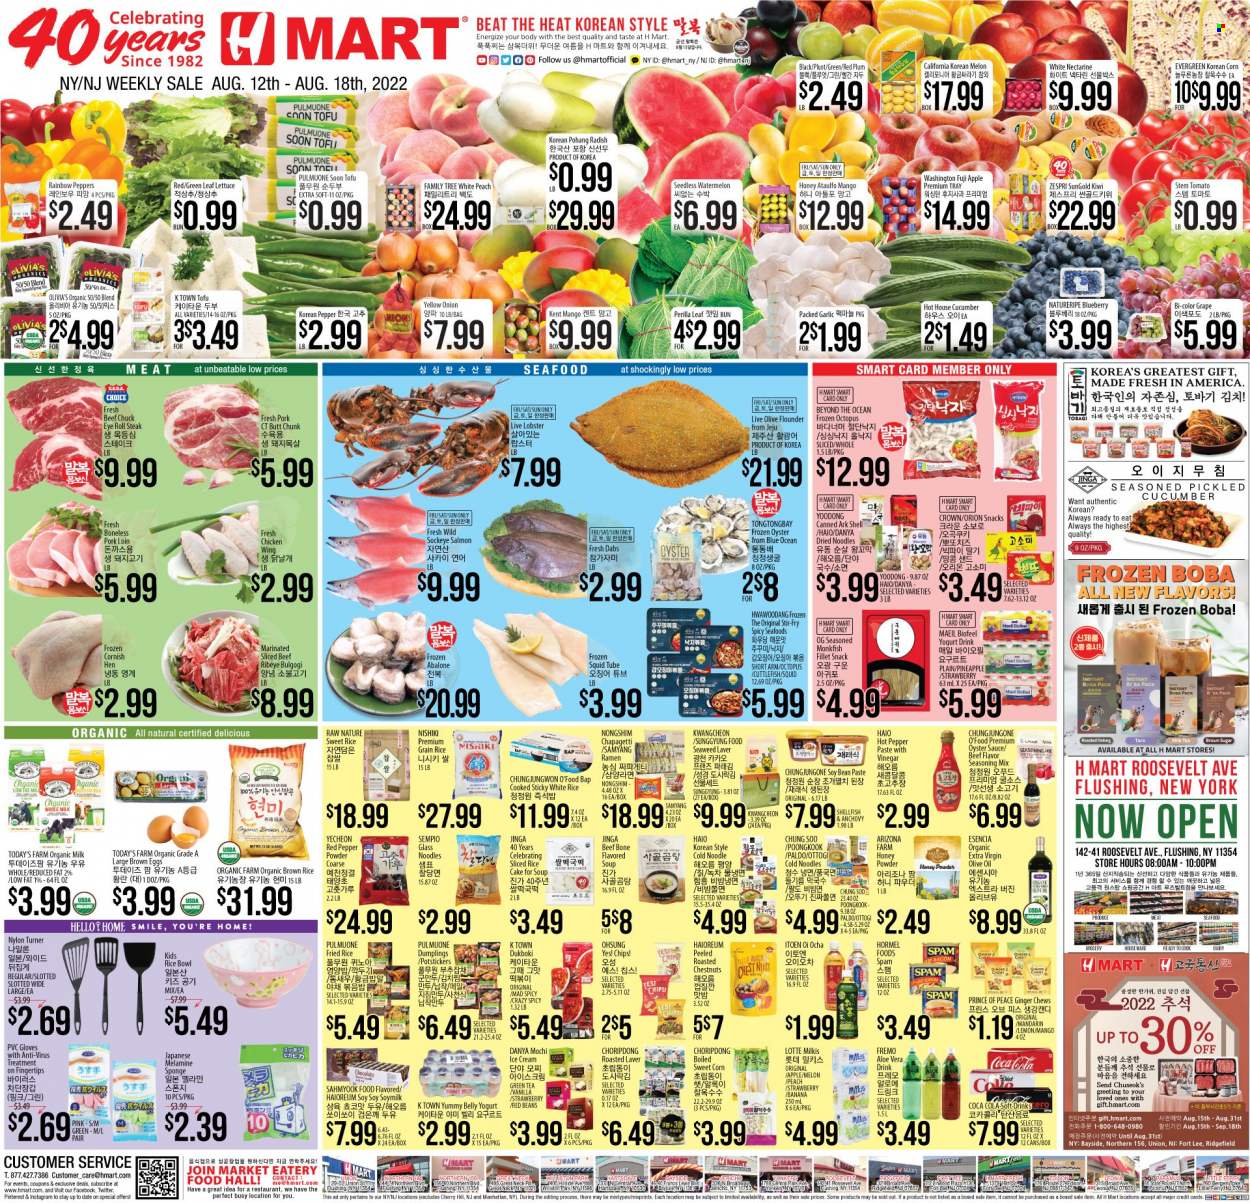 thumbnail - Hmart Flyer - 08/12/2022 - 08/18/2022 - Sales products - beans, corn, garlic, ginger, radishes, lettuce, peppers, sweet corn, kiwi, mandarines, watermelon, pineapple, Fuji apple, red plums, cuttlefish, flounder, lobster, monkfish, salmon, squid, octopus, oysters, seafood, abalone, ramen, soup, sauce, dumplings, noodles, Hormel, bacon, Spam, tofu, yoghurt, soy milk, organic milk, yoghurt drink, eggs, ice cream, snack, chewing gum, cane sugar, seaweed, anchovies, red beans, brown rice, white rice, spice, oyster sauce, extra virgin olive oil, olive oil, oil, honey, chestnuts, Coca-Cola, soft drink, AriZona, green tea, tea, steak, pork loin, pork meat, houseware, sponge, tray, bowl, nectarines, melons. Page 1.